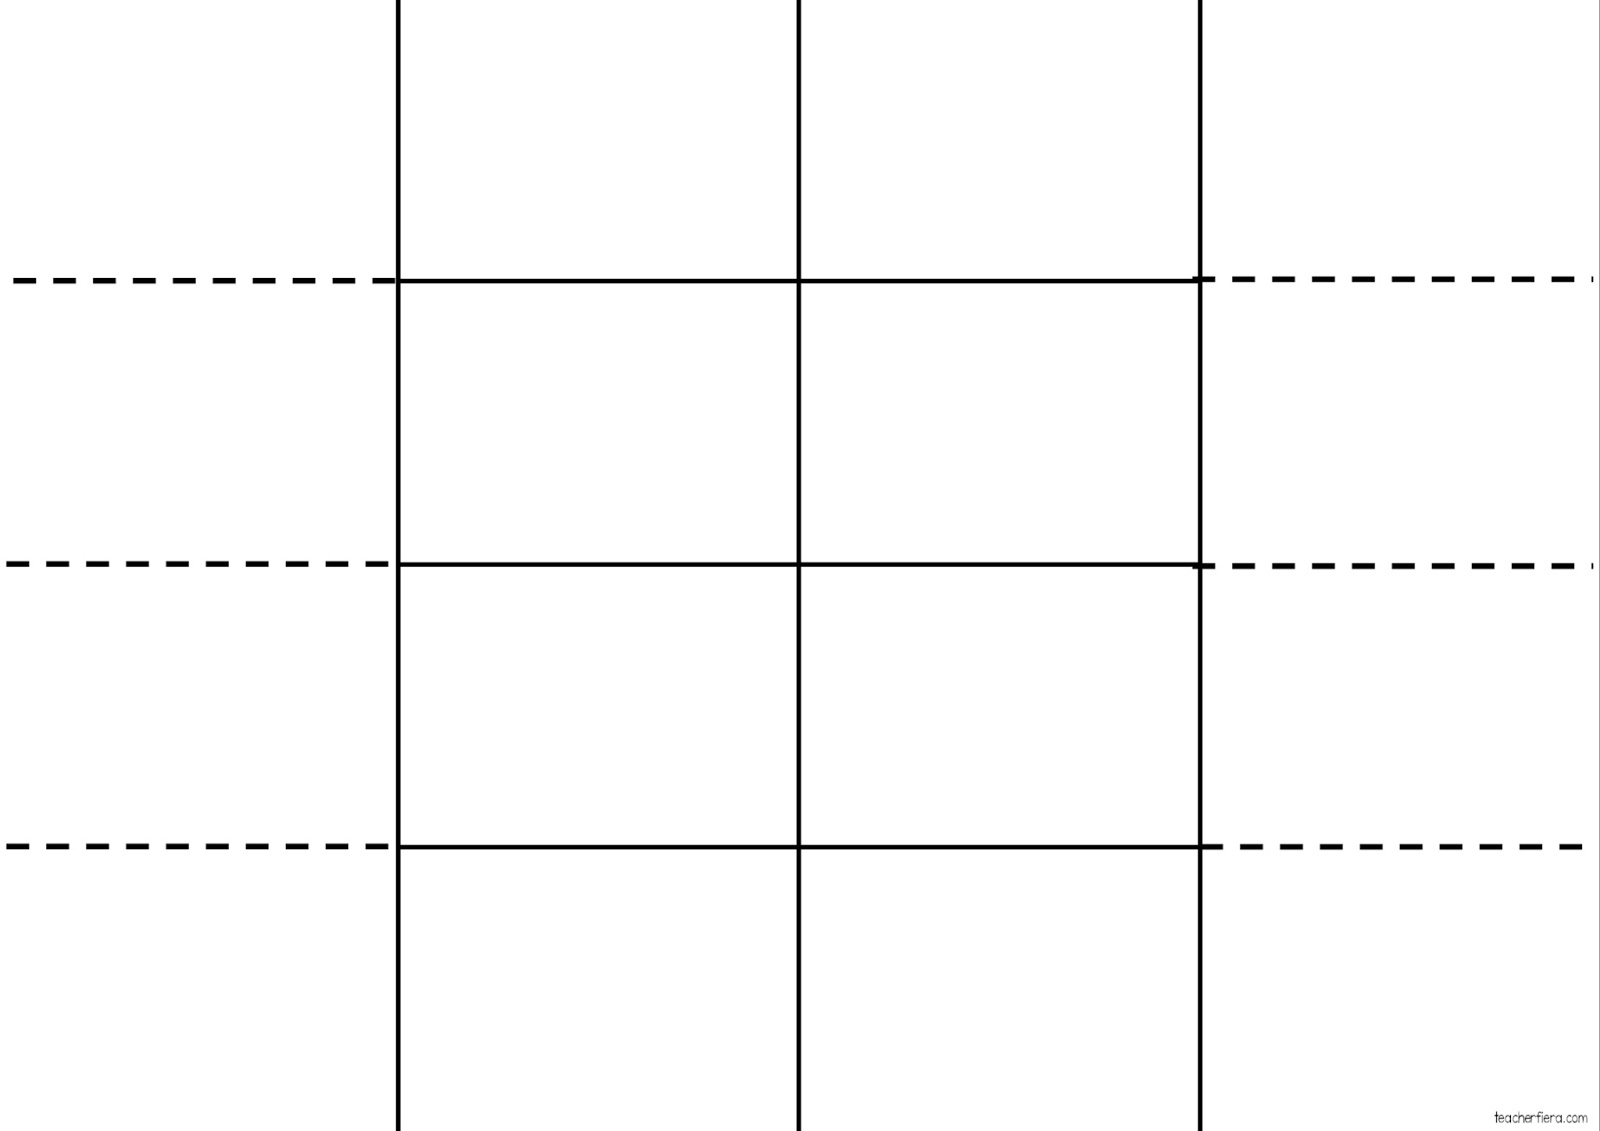 Flipbook Template for ANY Subject {EDITABLE}  Flip book, Flip book  template, Teaching language arts